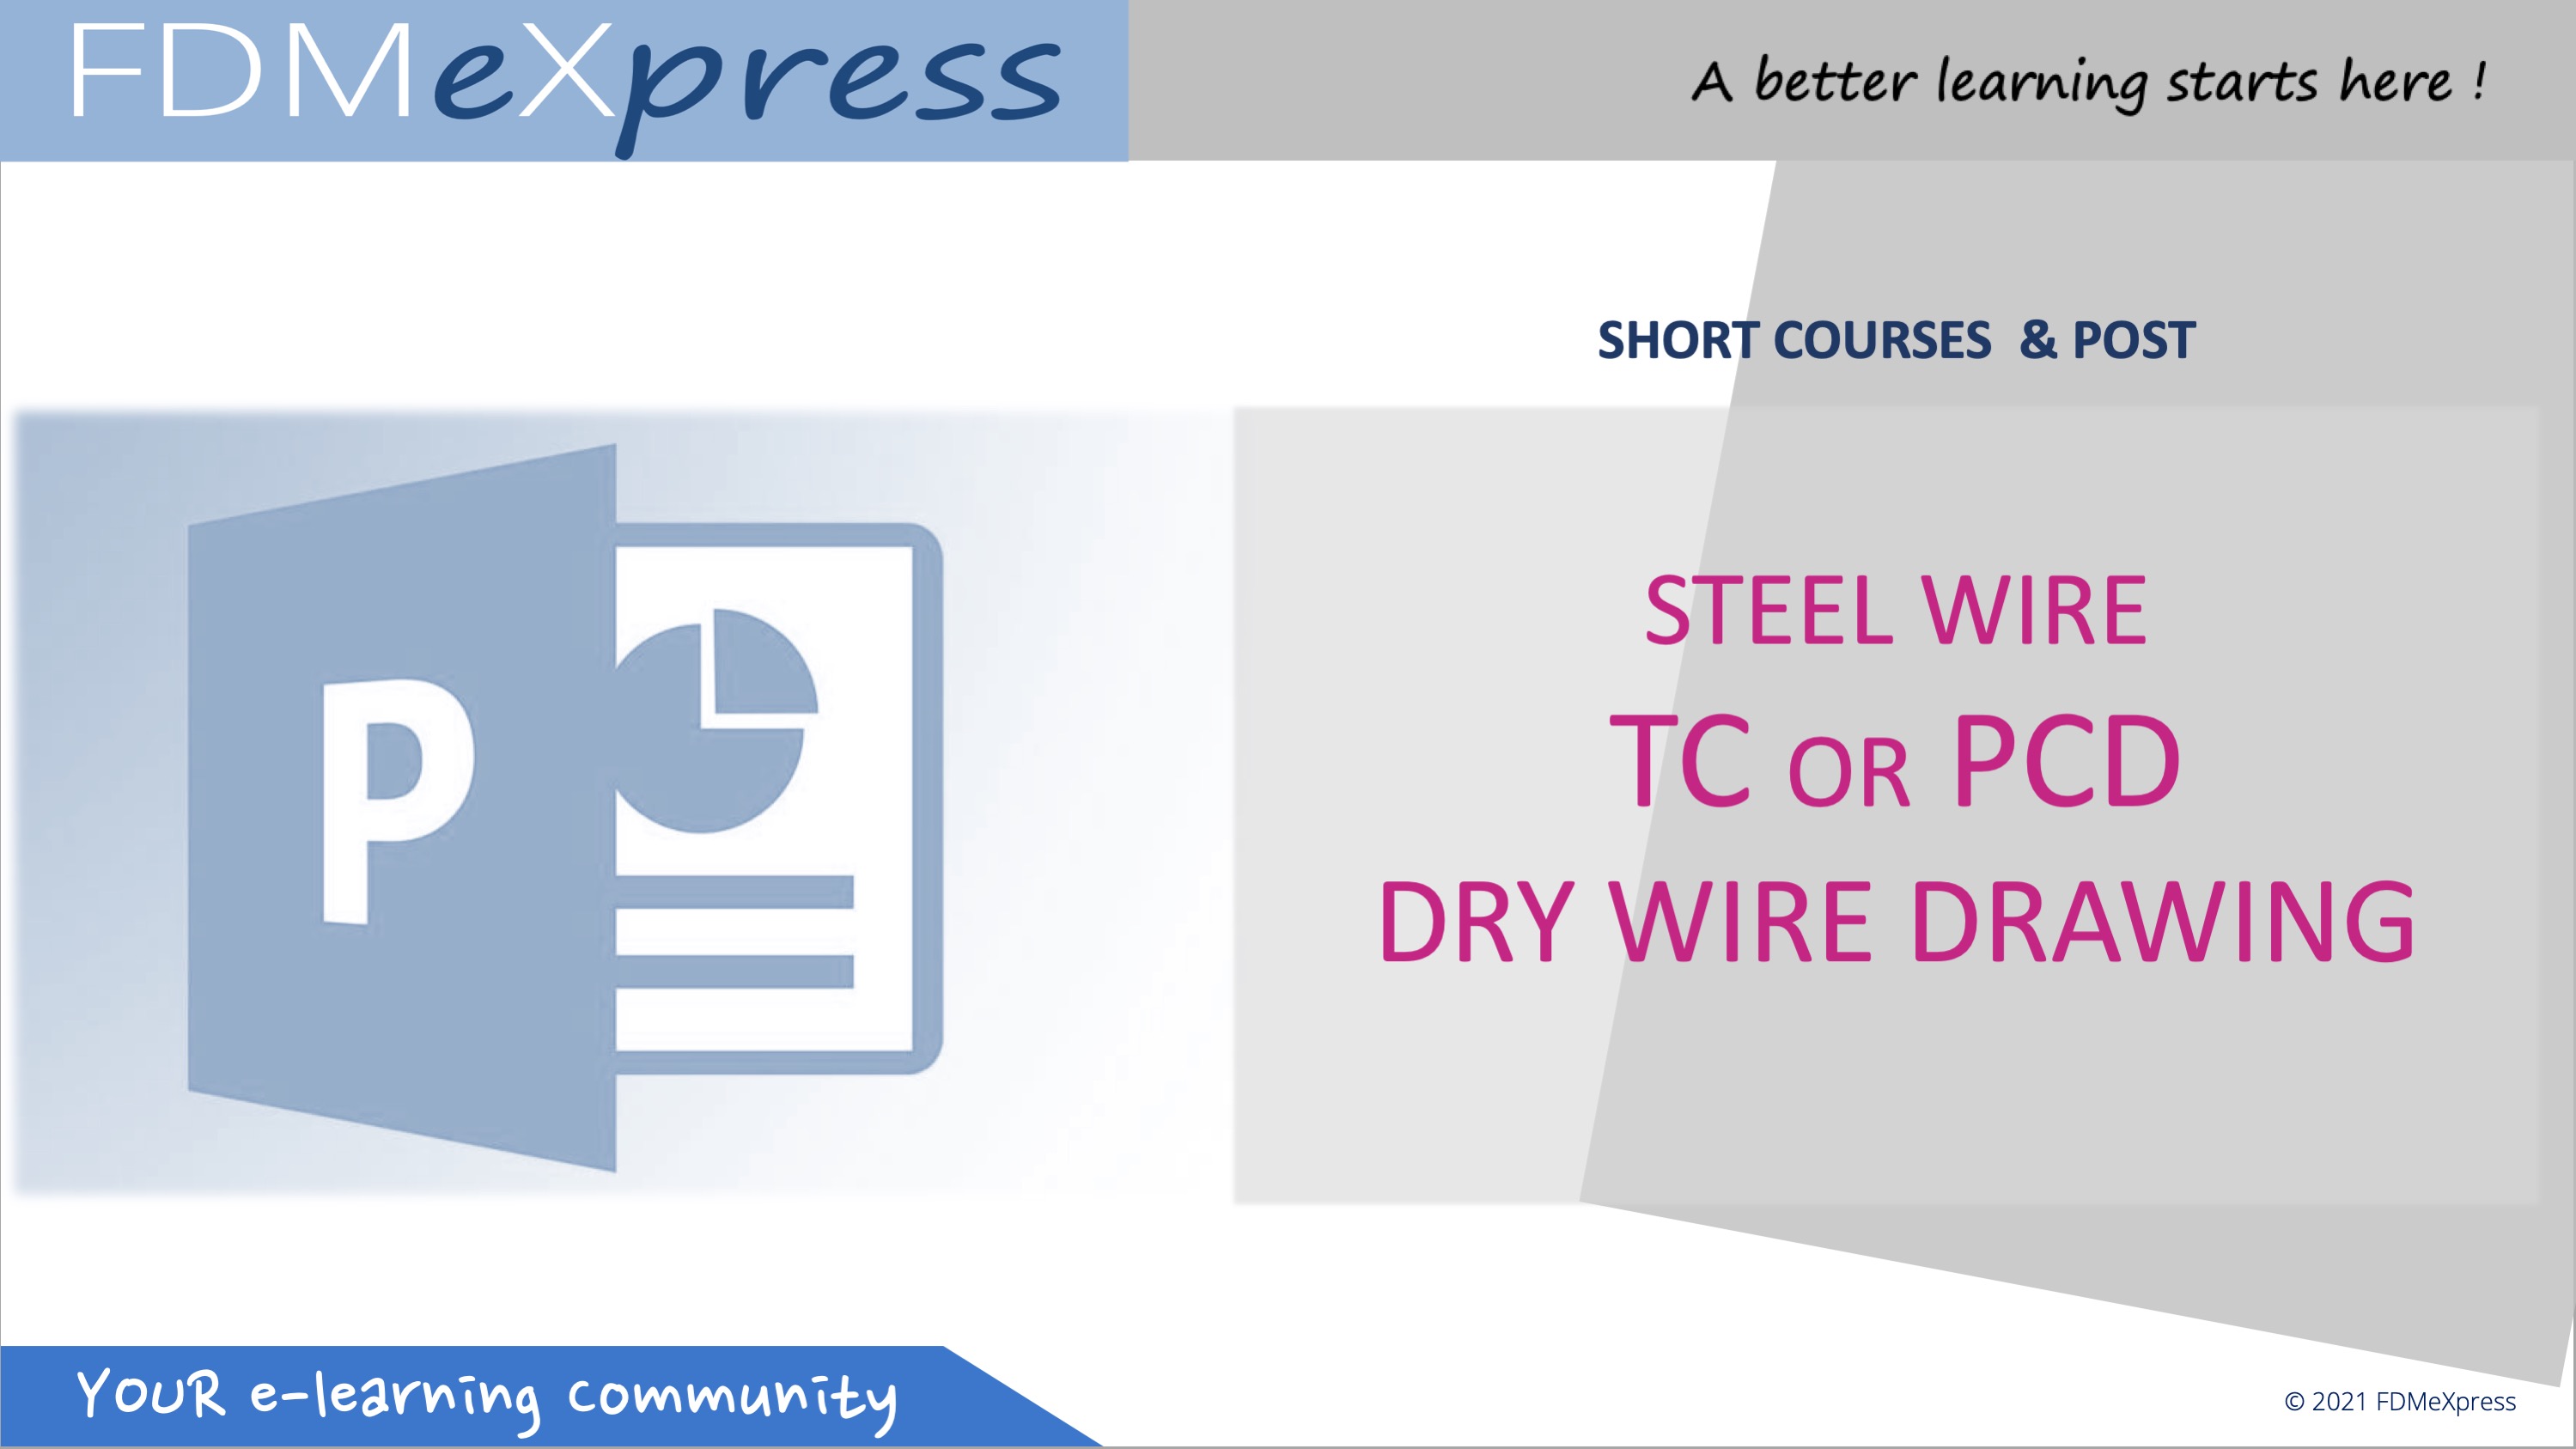 Steel Wire - TC or PCD dies for dry wire drawing